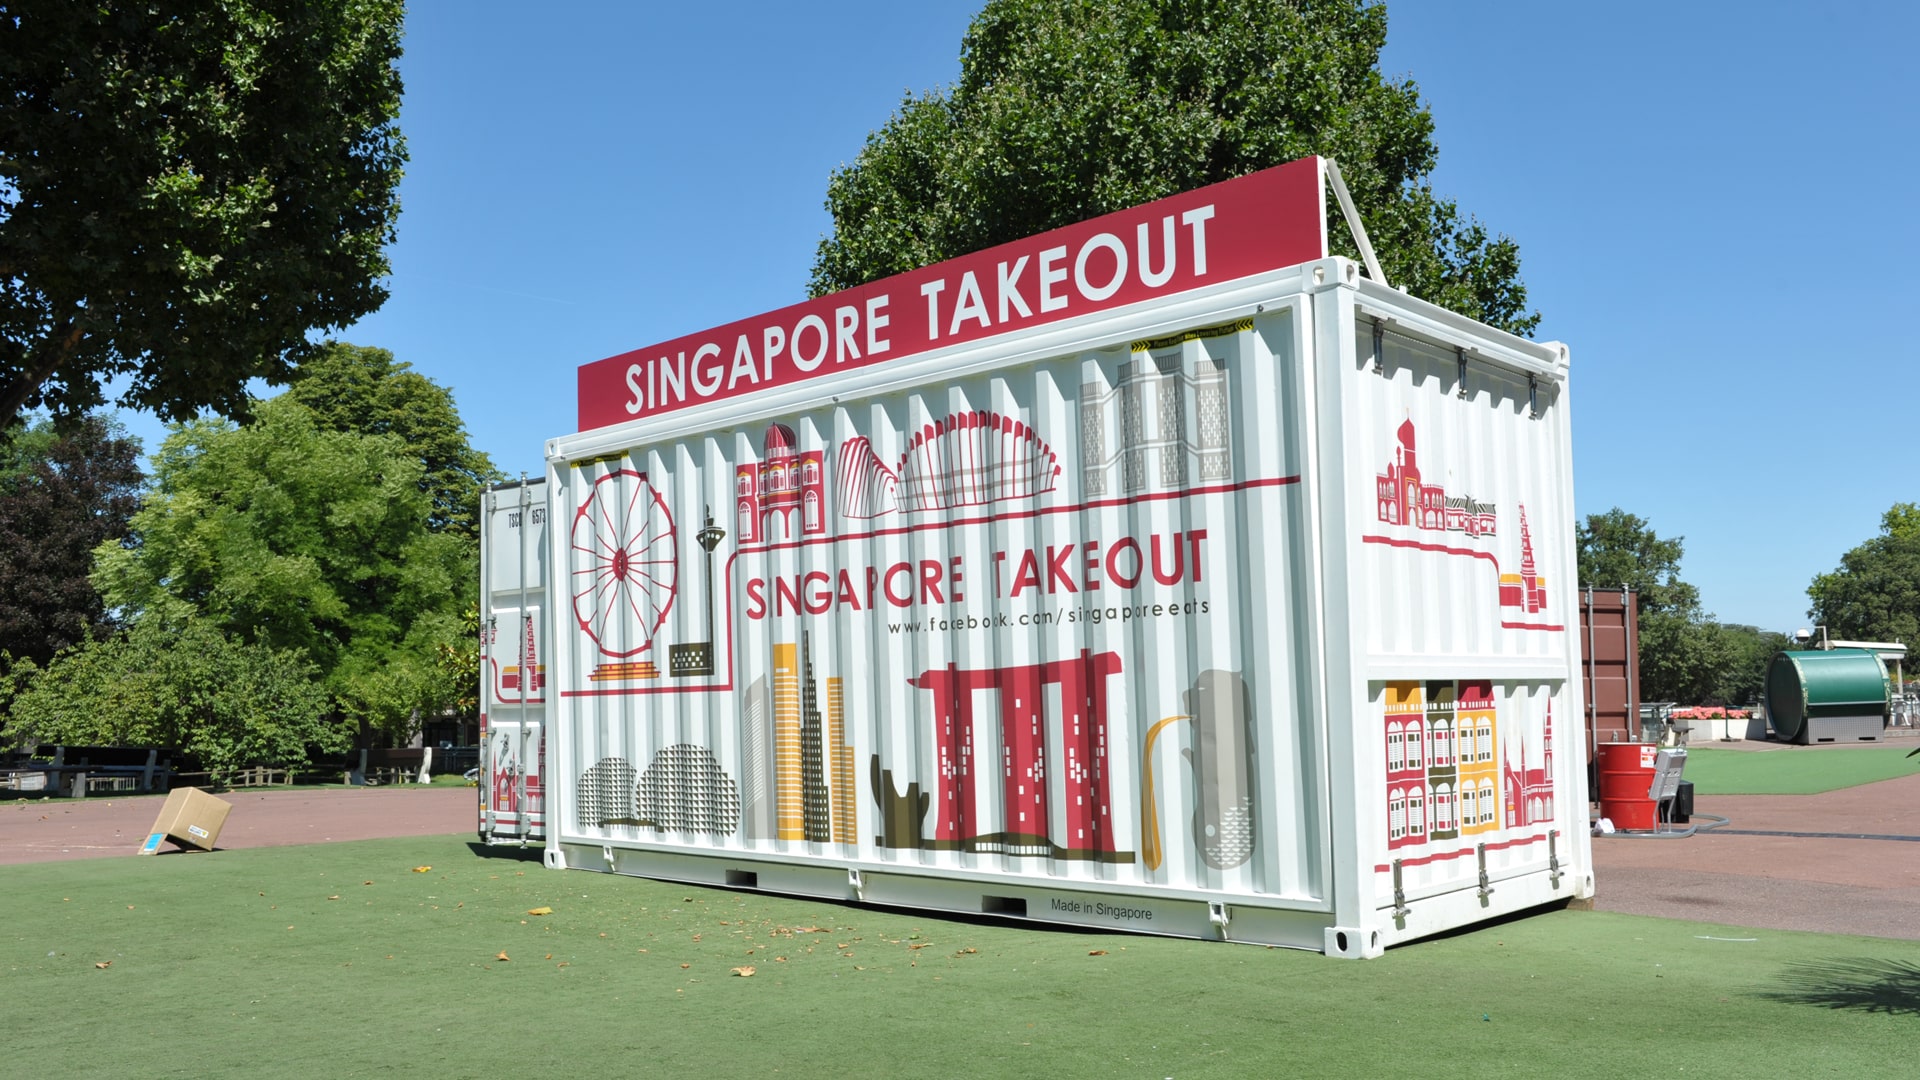 tsc_opt-images_customized-containers_singapore-takeout-paris-1920x1080-04-min